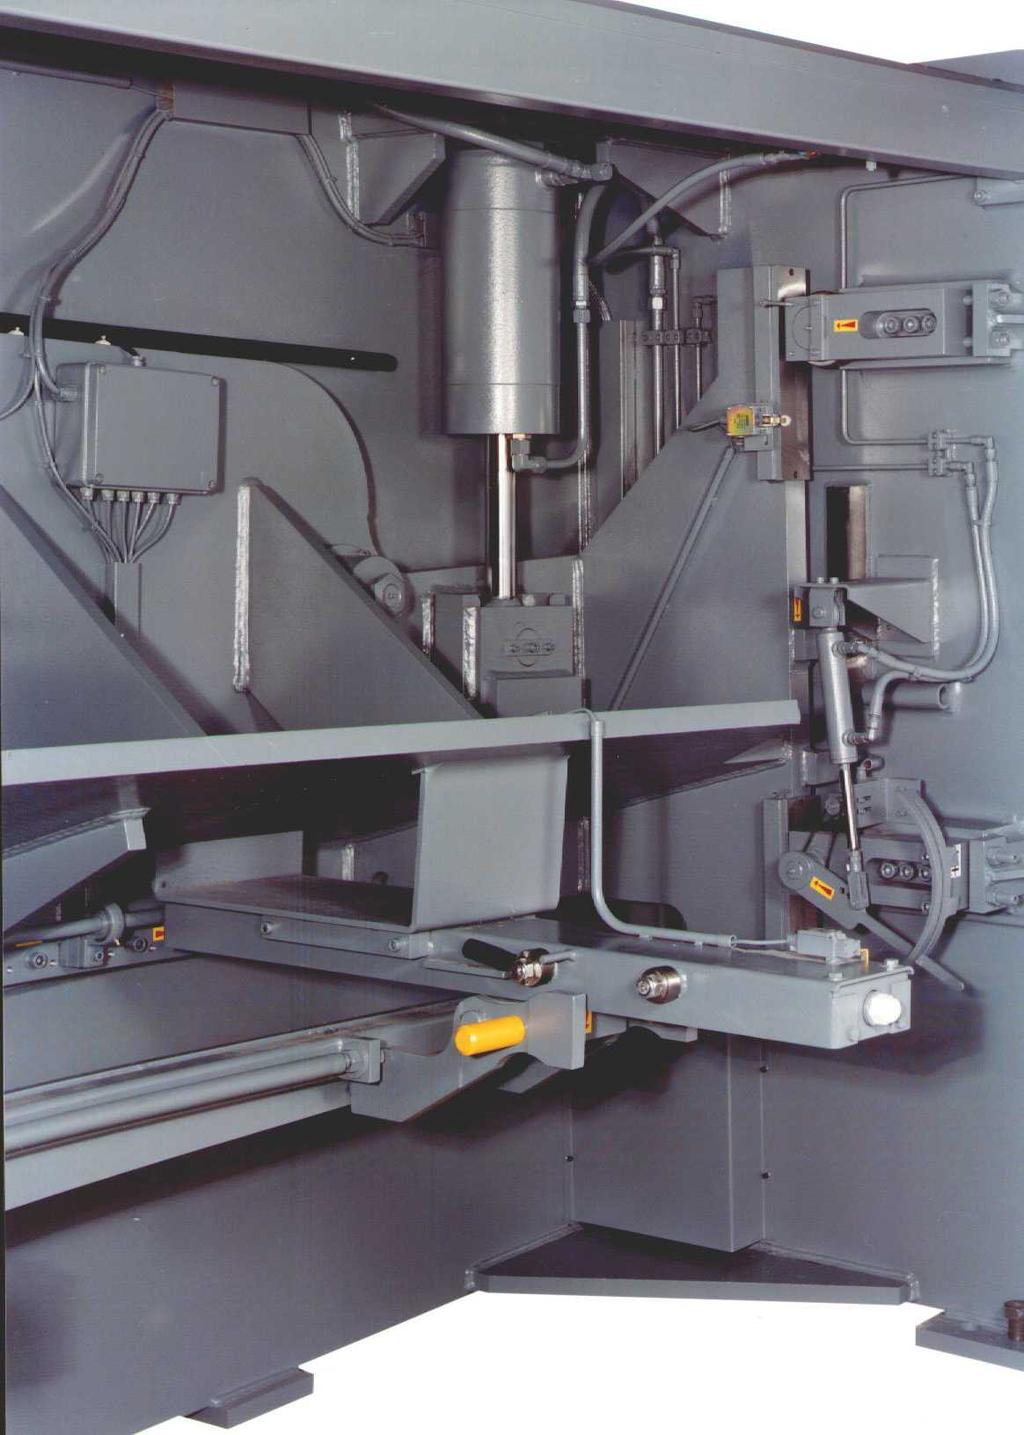 The fully open rear side provides the operator the possibility of easy removal or adapting different conveying and stacking systems to the machine.